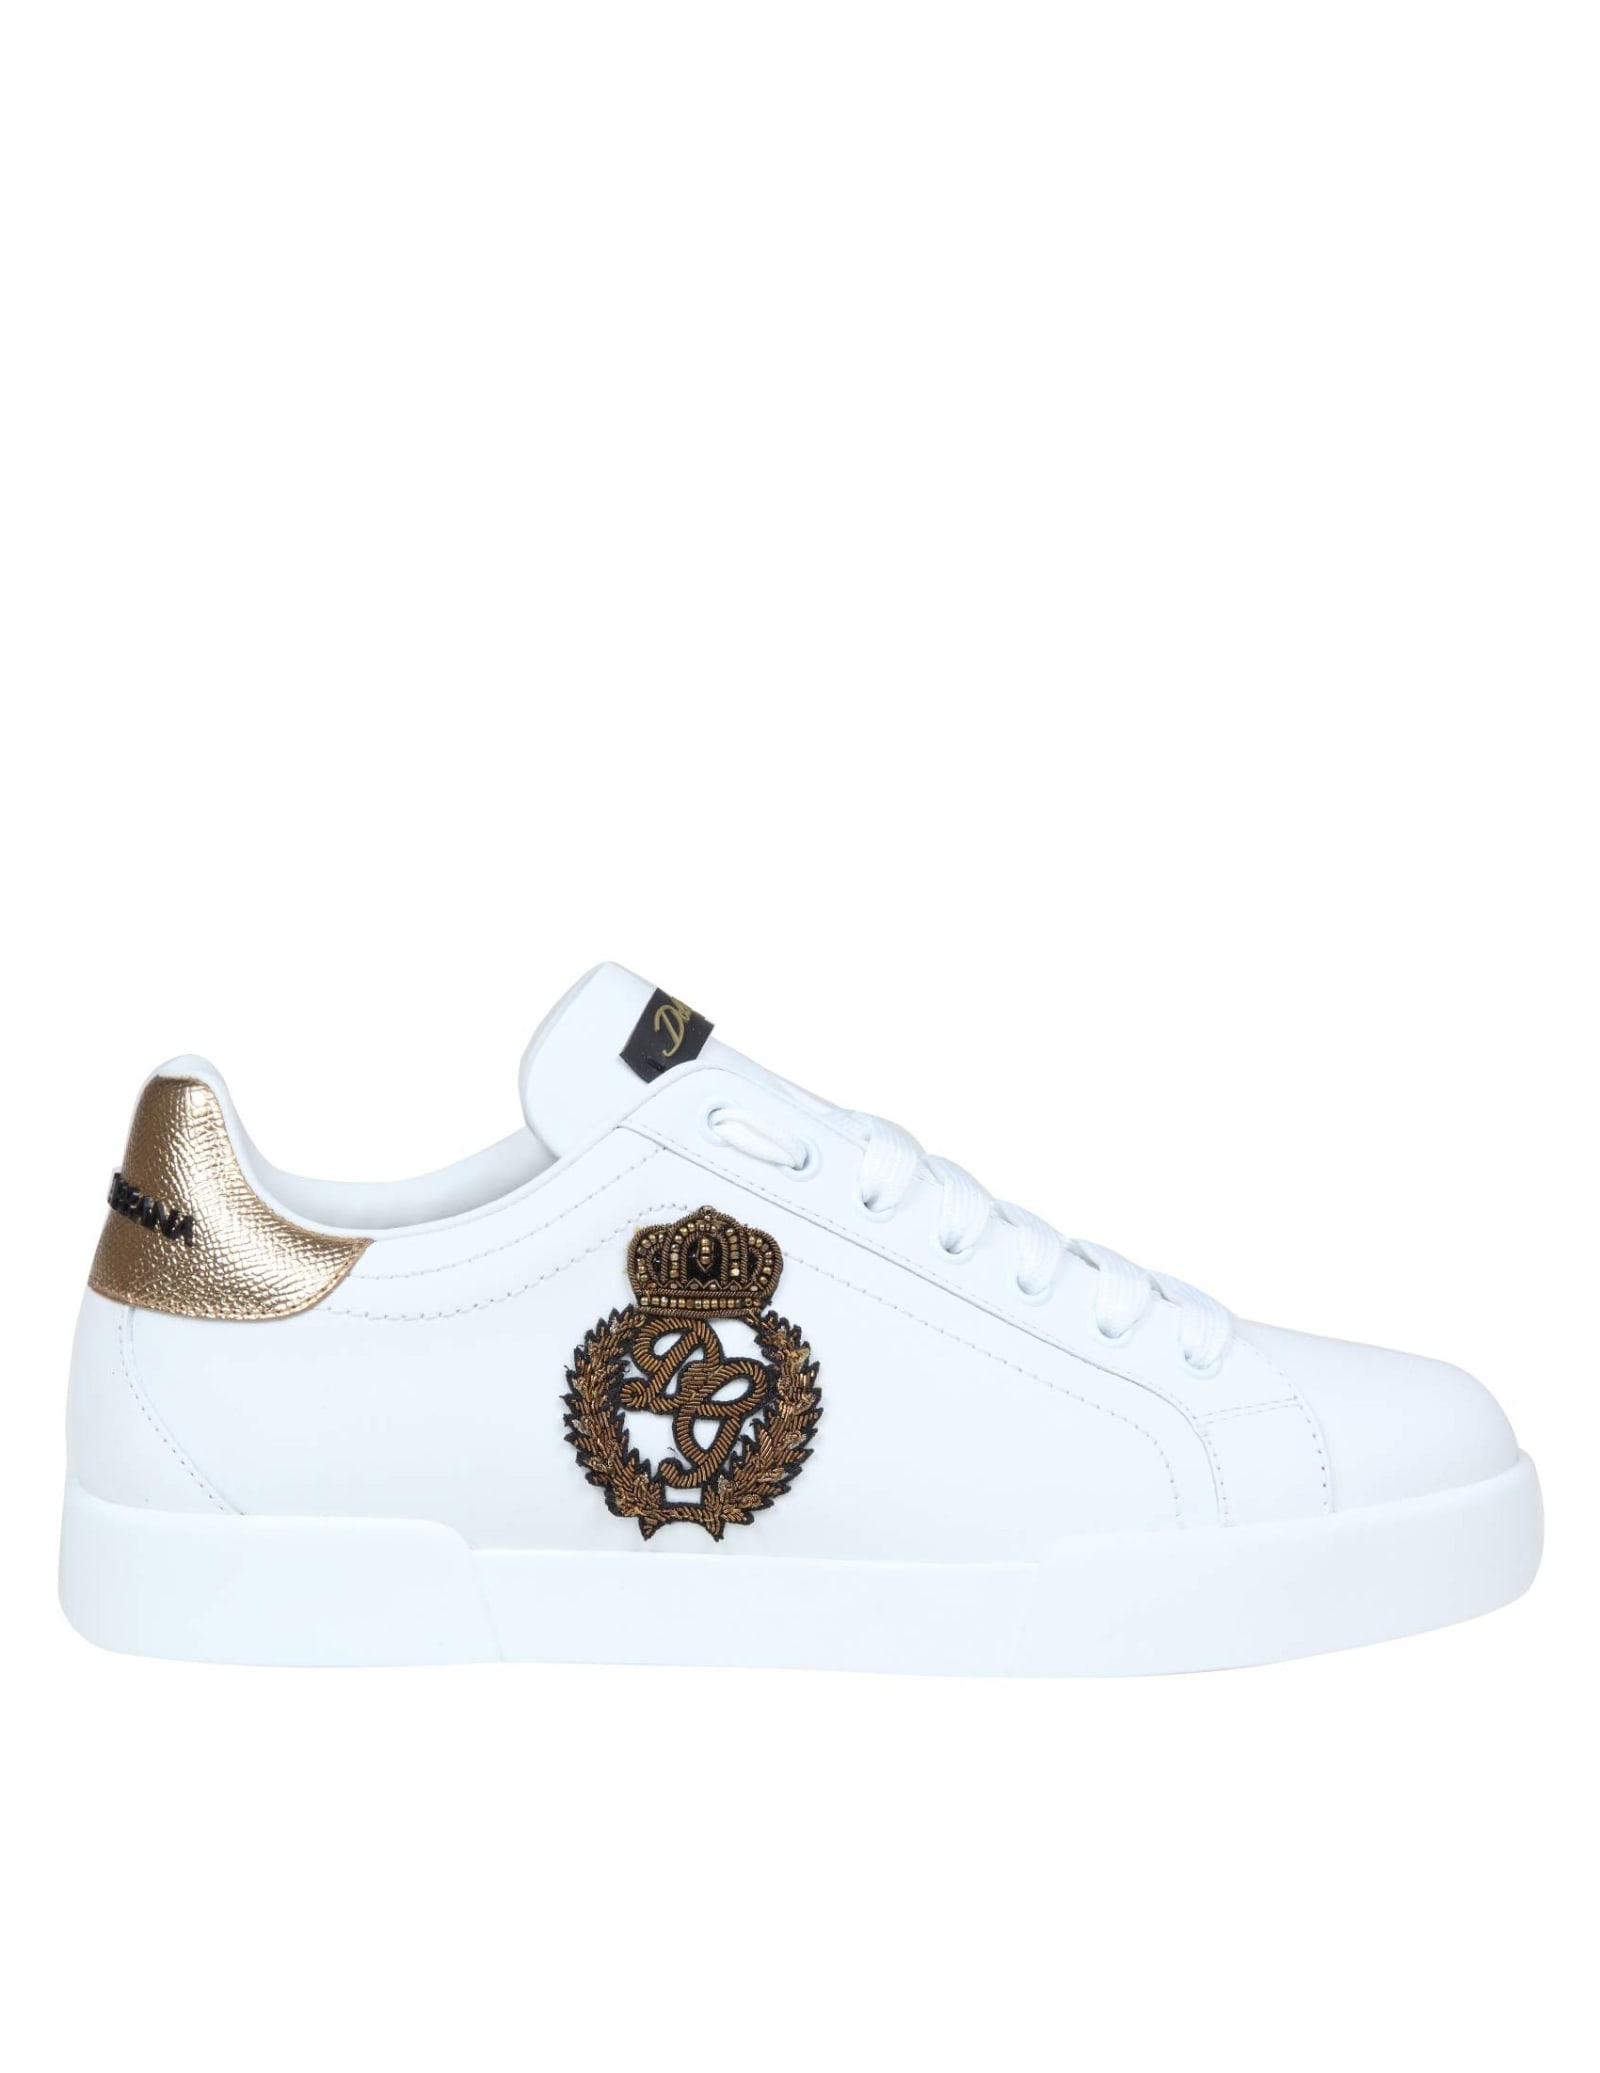 Dolce & Gabbana Portofino Sneakers In Leather With Side Crown Logo